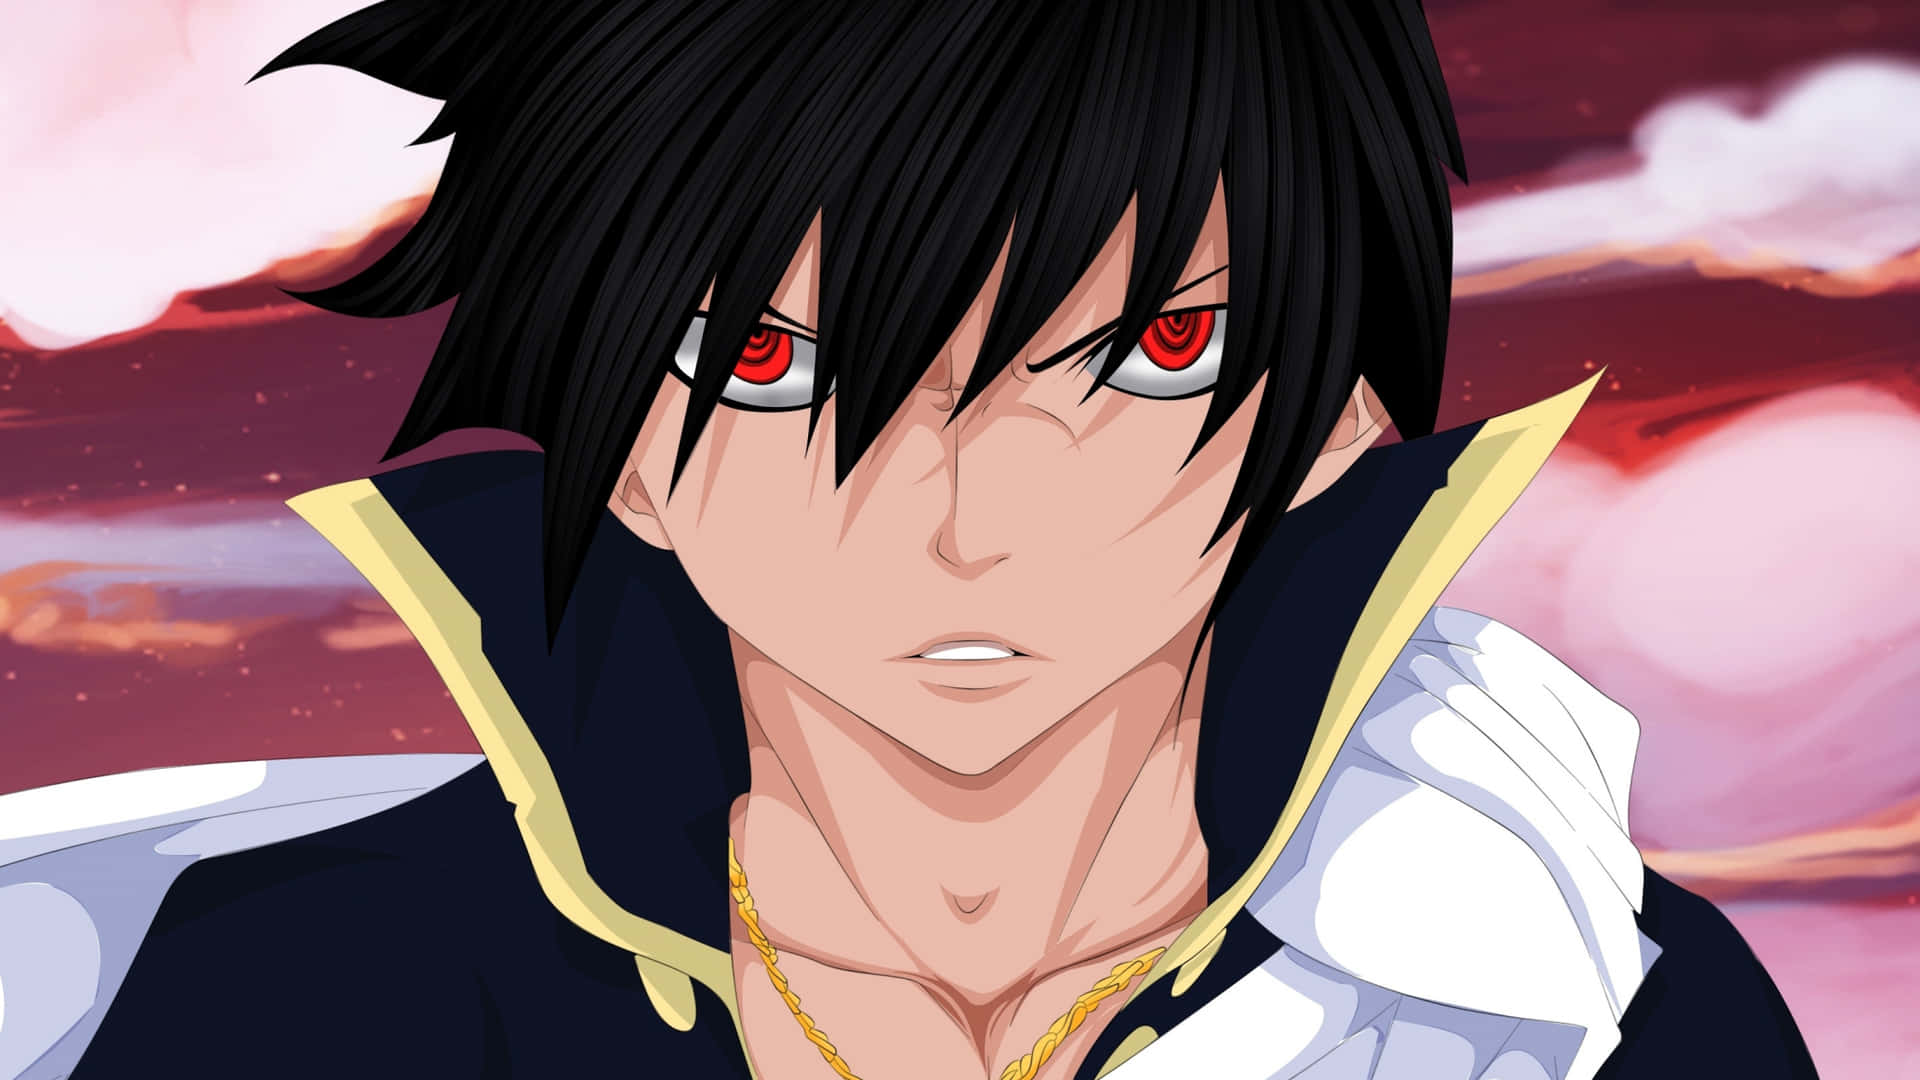 Zeref Dragneel - Dark Mage of the Fairy Tail Universe Wallpaper